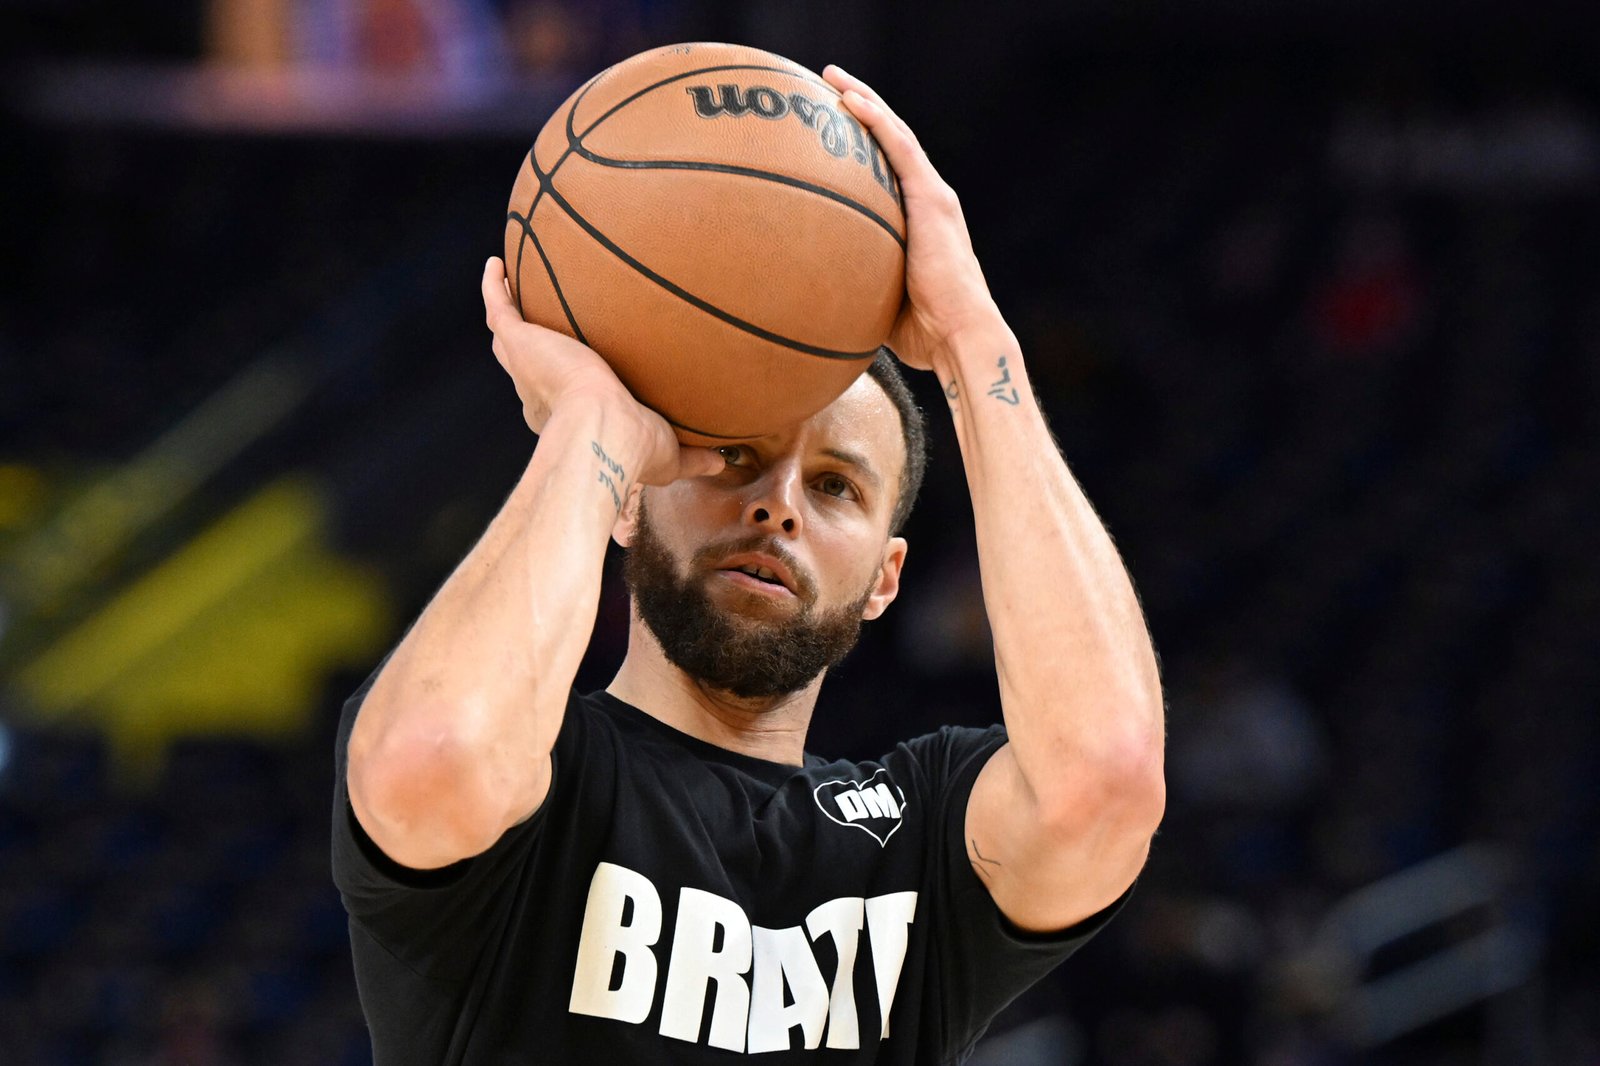 Steph Curry vs Sabrina Ionescu all set for NBA All-Star weekend